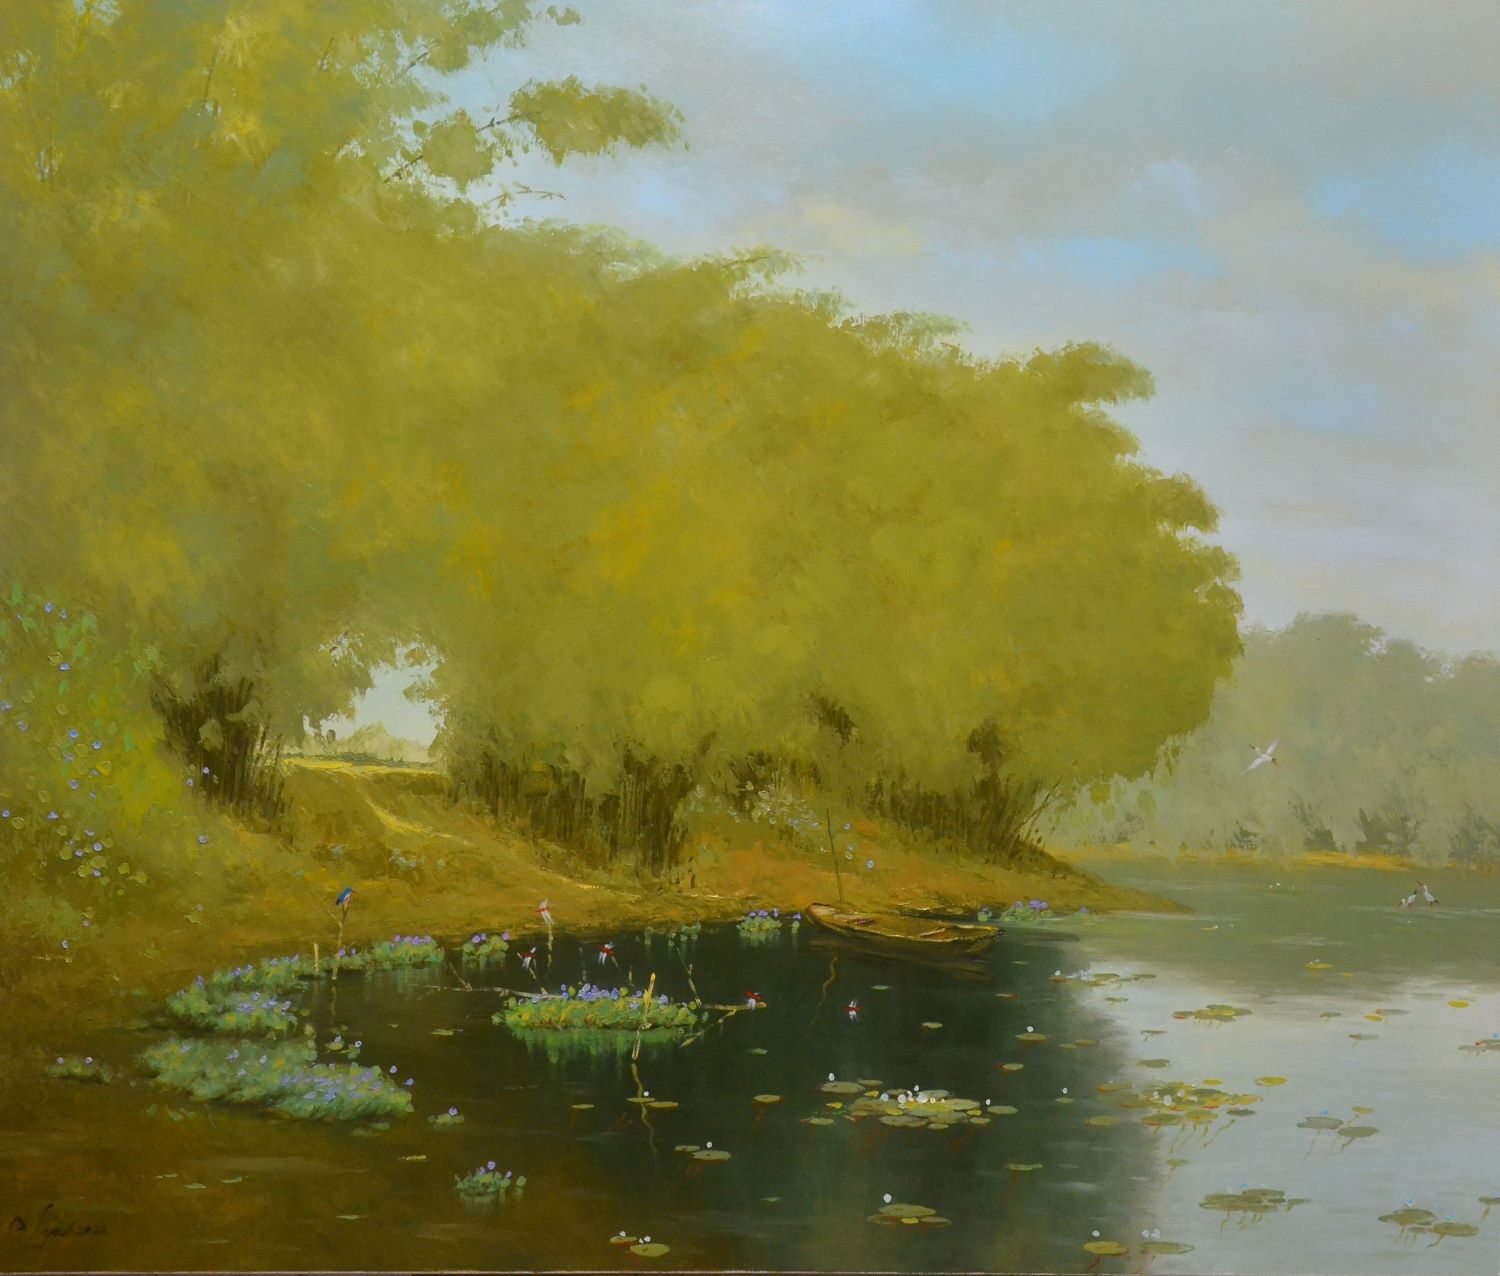 Autumn Afternoon - Vietnamese Oil Painting by Artist Dang Dinh Ngo